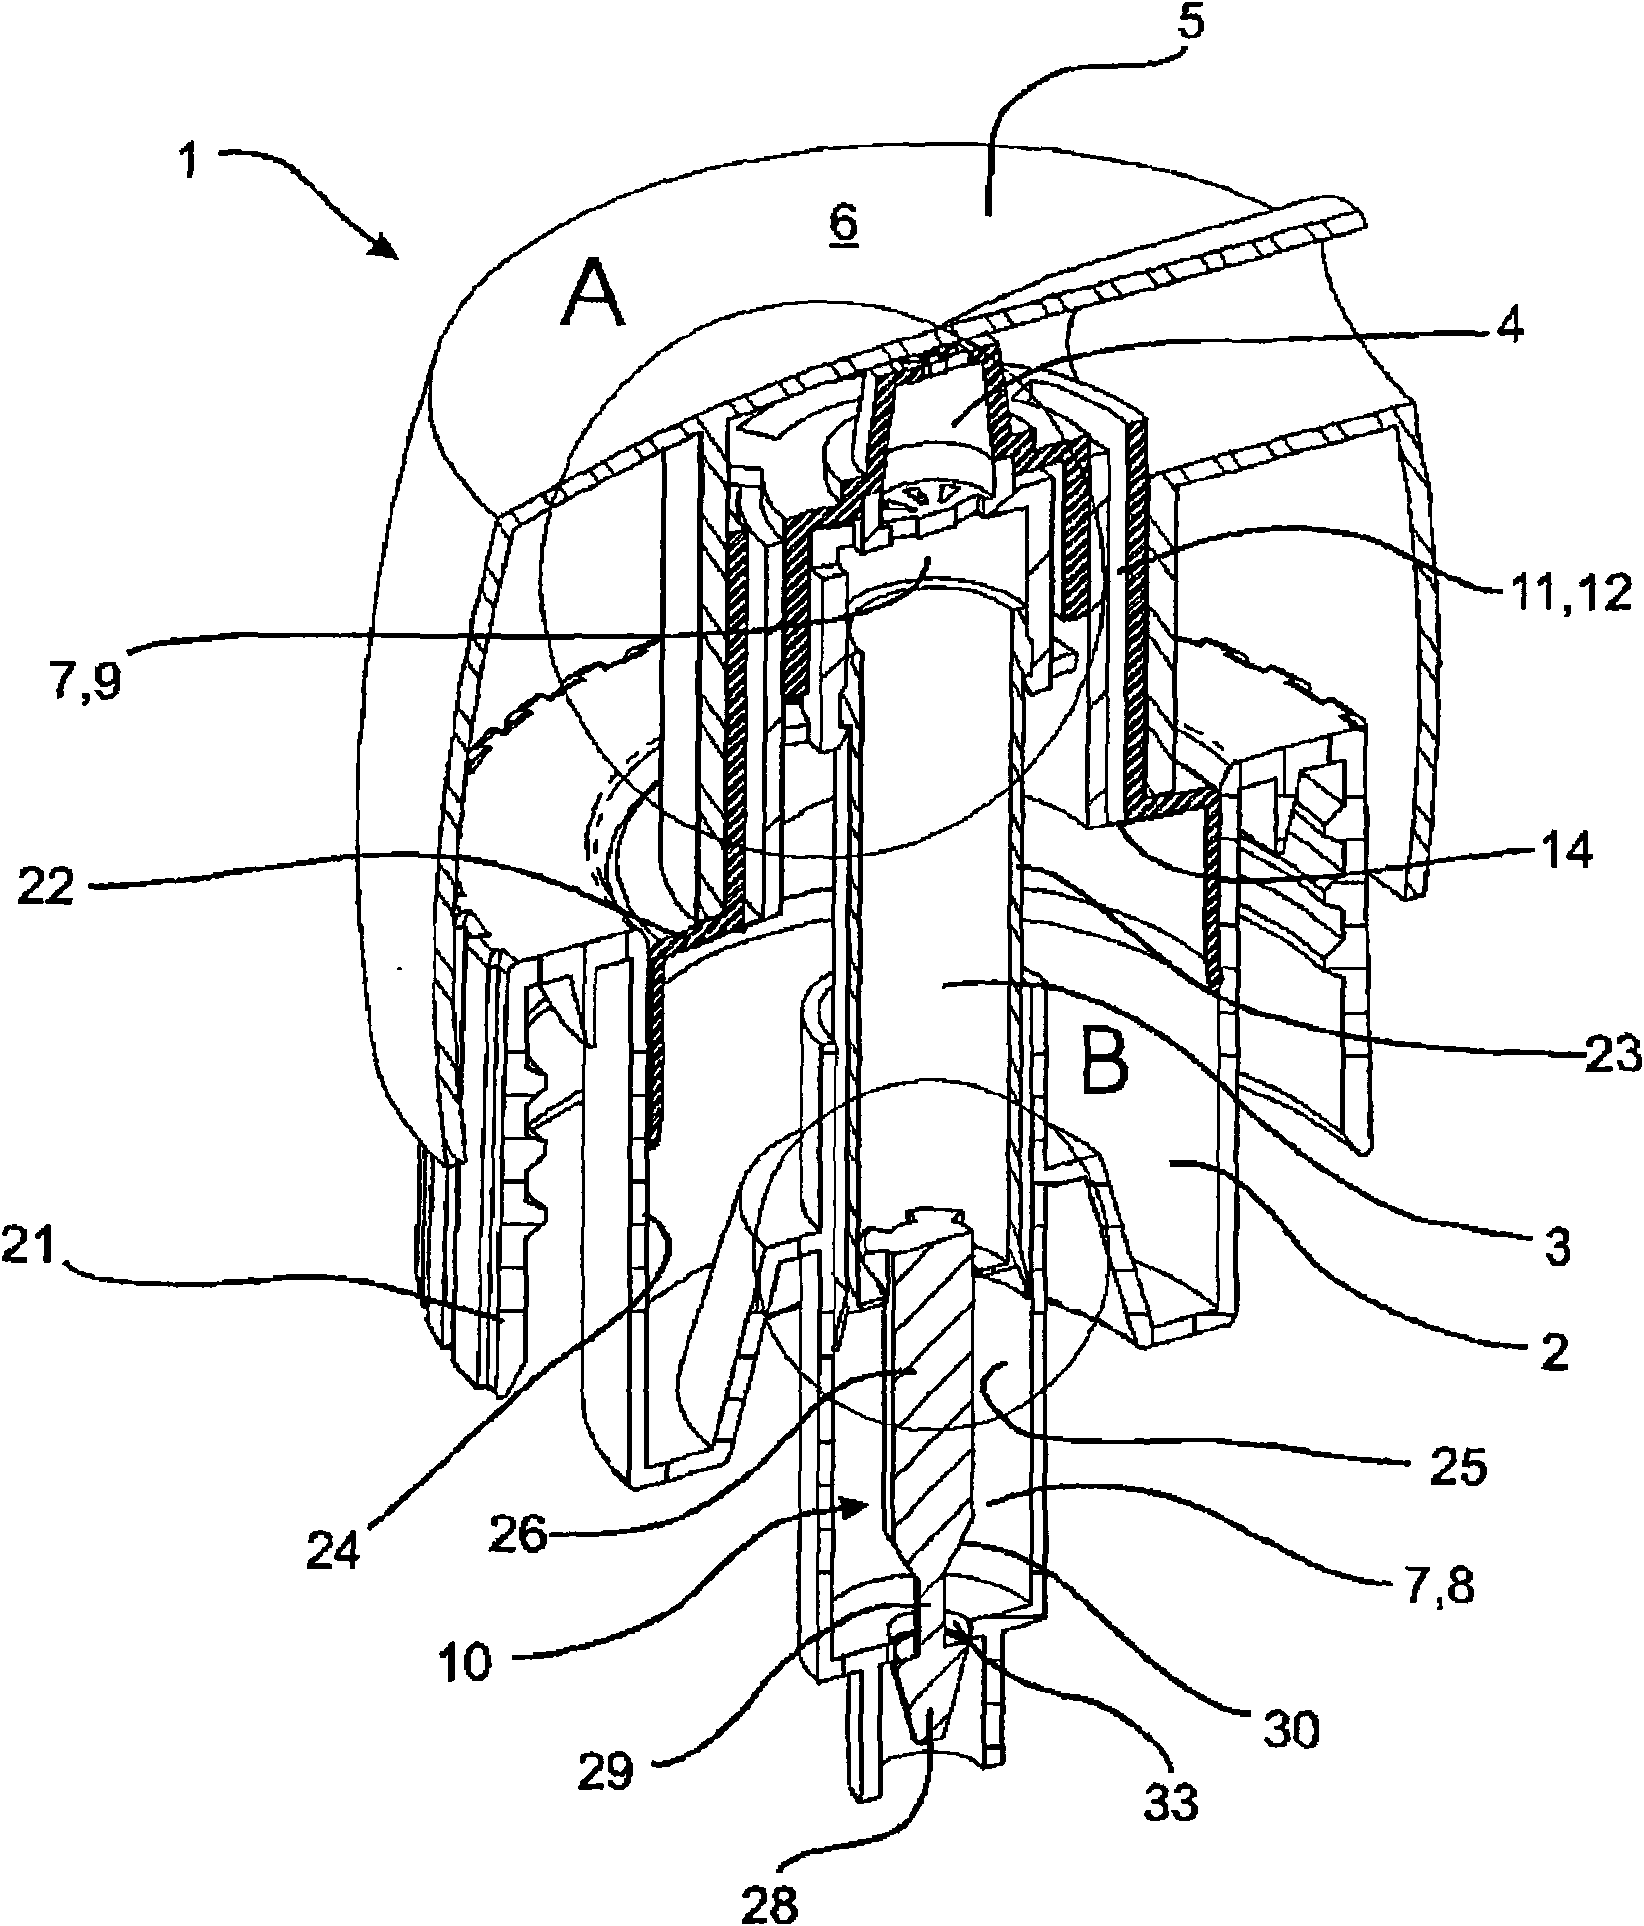 Foaming device for the production of personal-care or cleaning foam